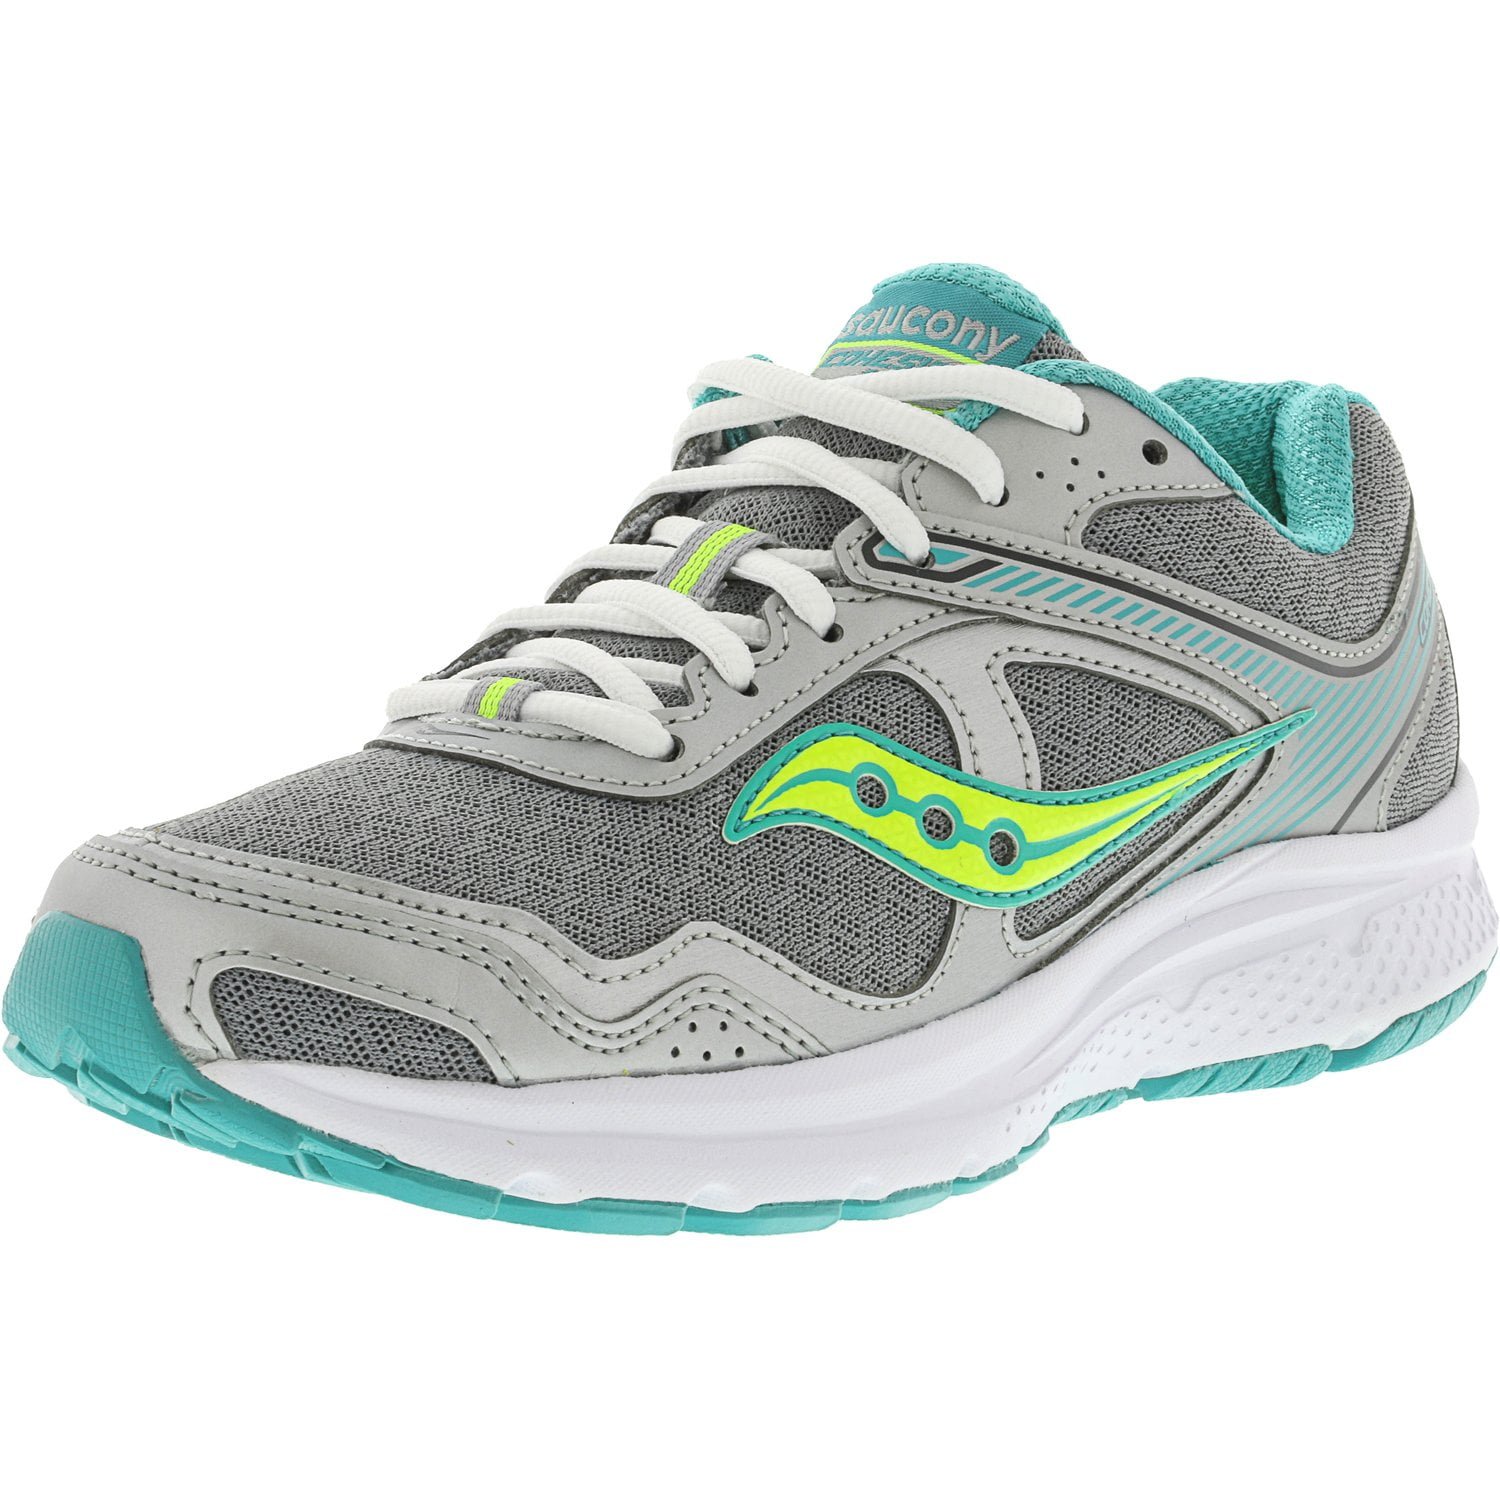 Saucony Women's Grid Cohesion 10 Grey / Teal Citron Ankle-High Running ...